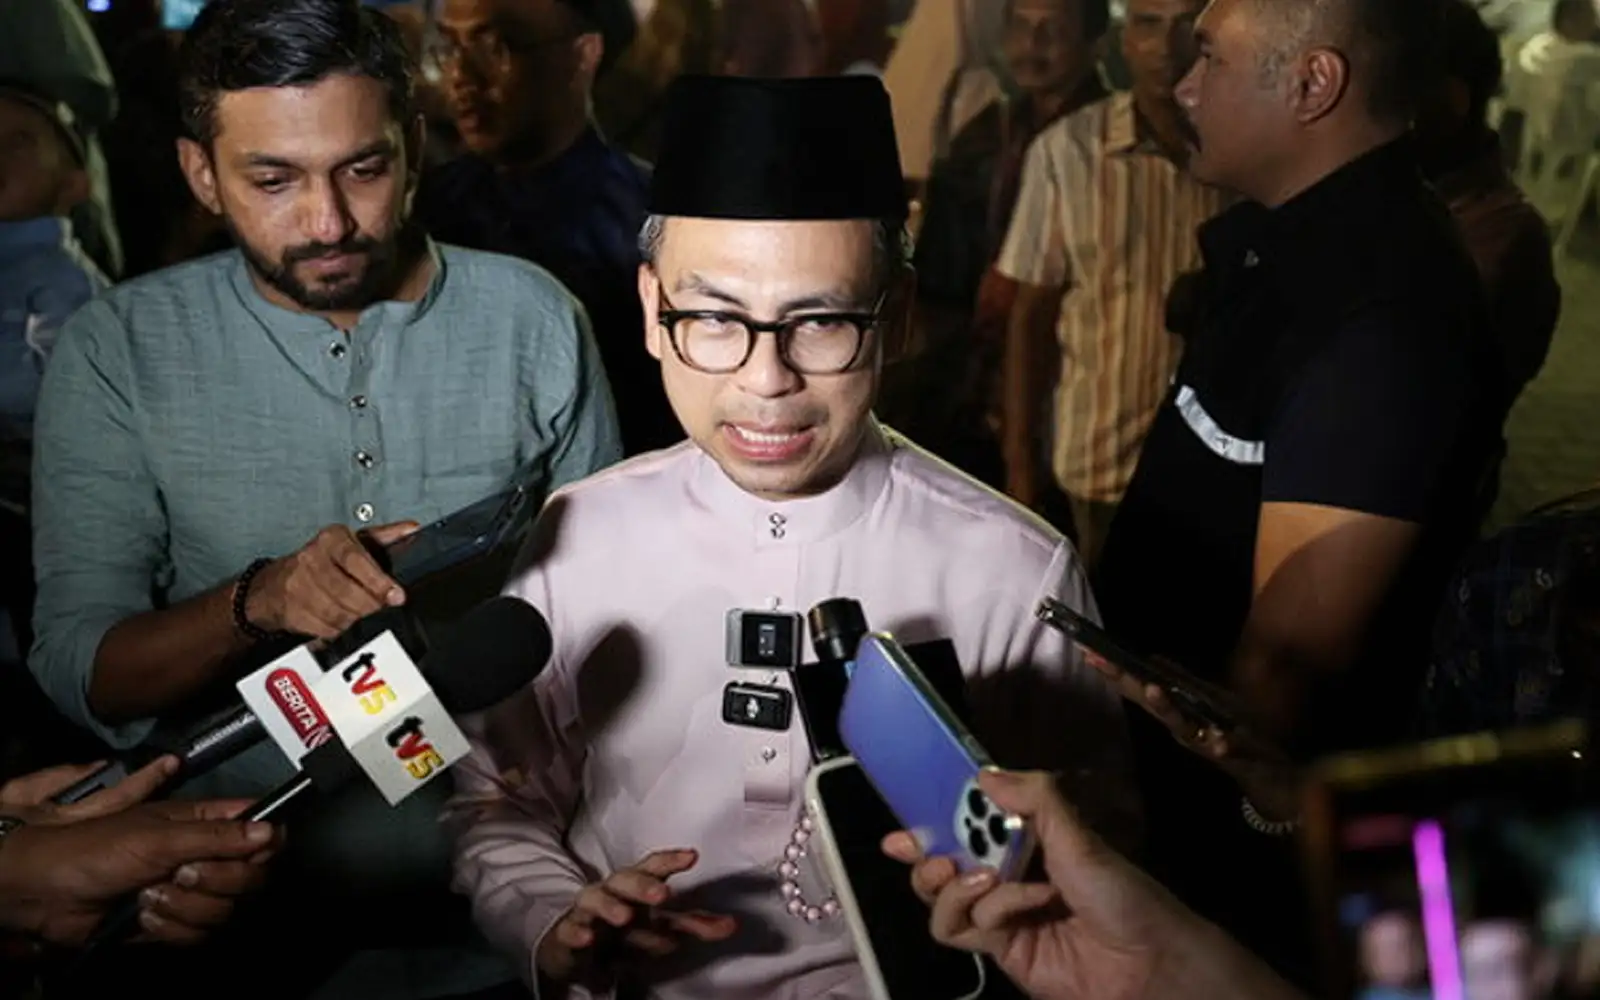 muhyiddin has no moral standing to criticise govt over addendum, says fahmi